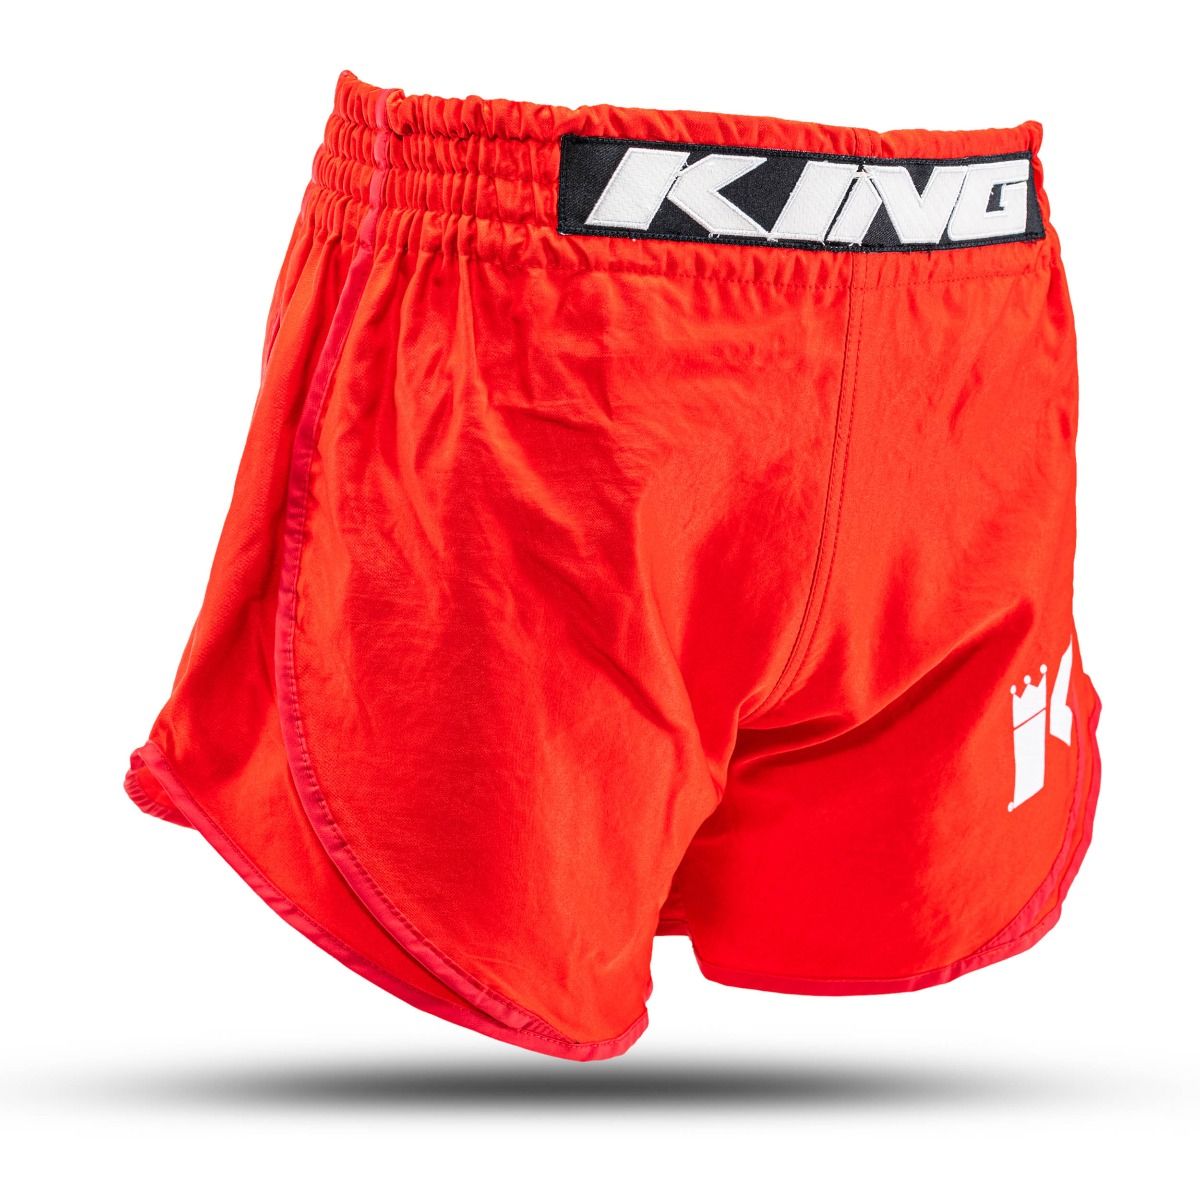 King Pro Boxing - Fightshort - CLASSIC - RED - ROOD